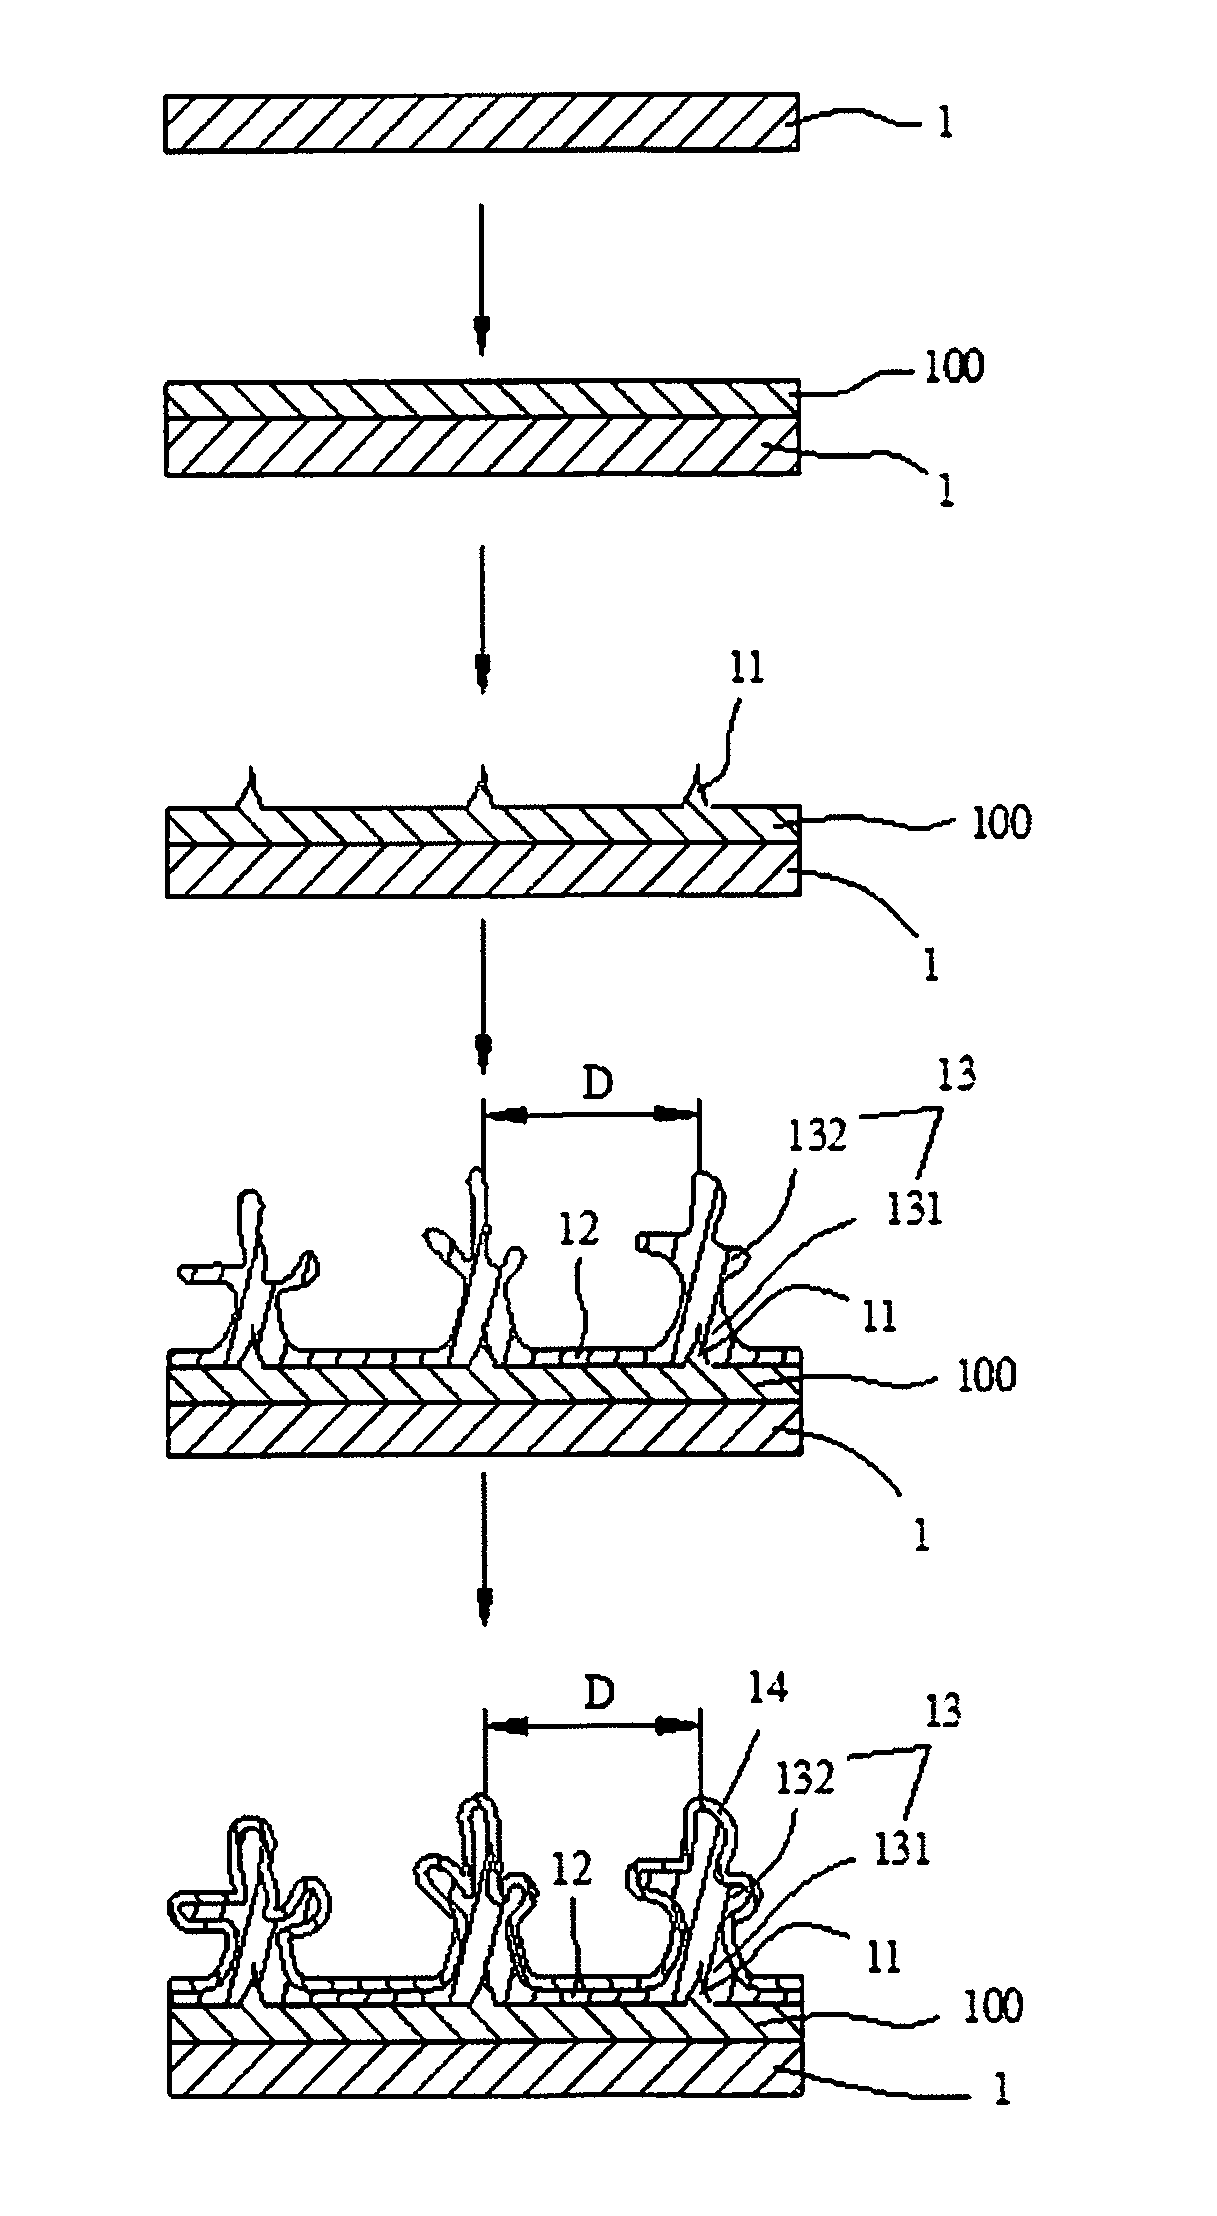 Heat transfer component with dendritic crystal structures and purpose and method of use for such a component